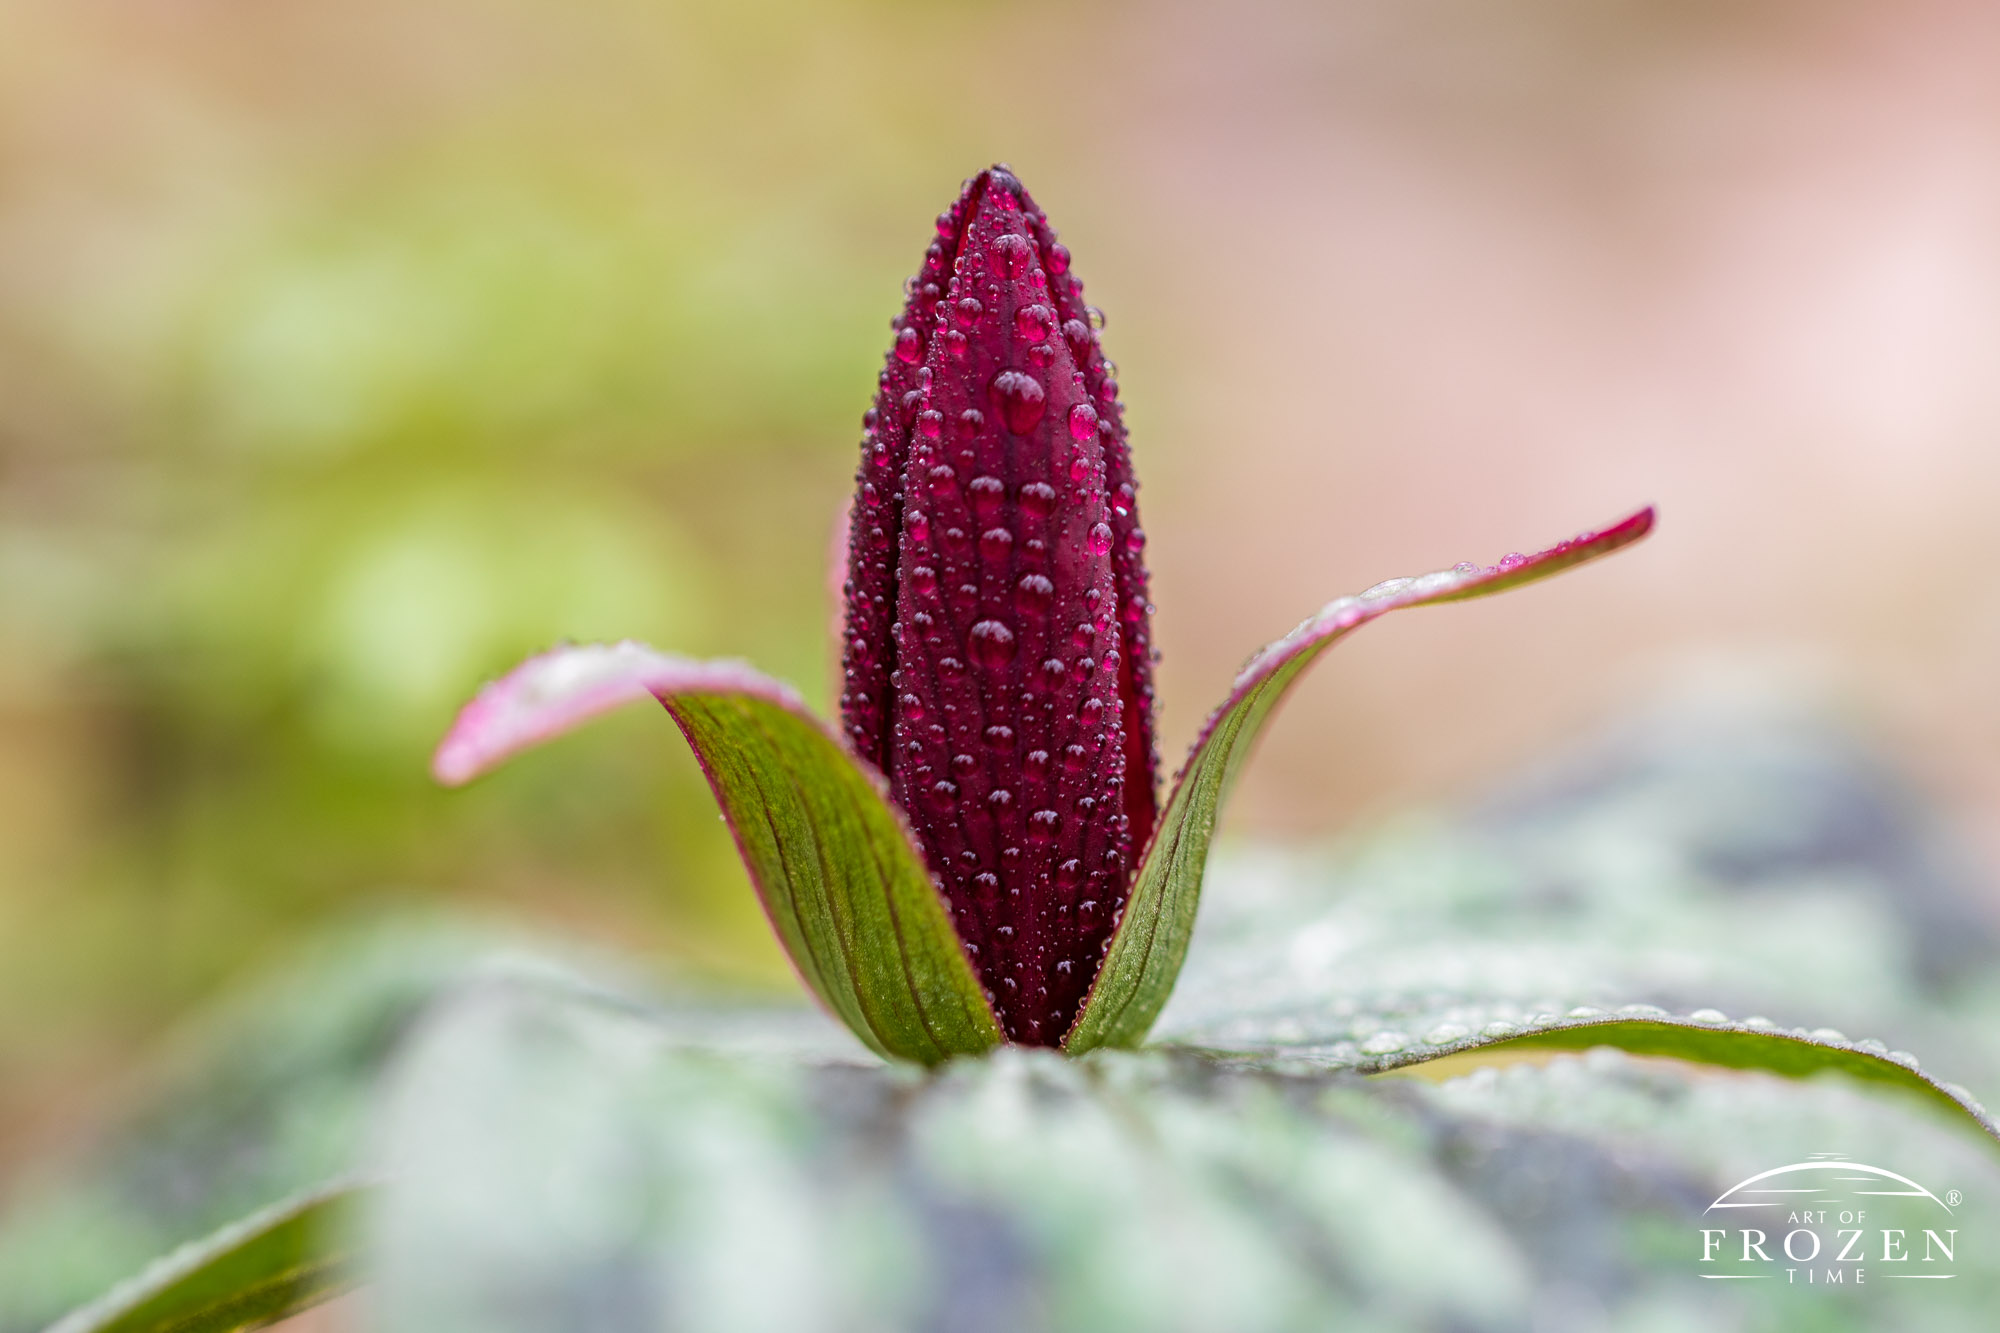 A close up view of the Trillium sessile which tightly focuses on the central dark red bloom